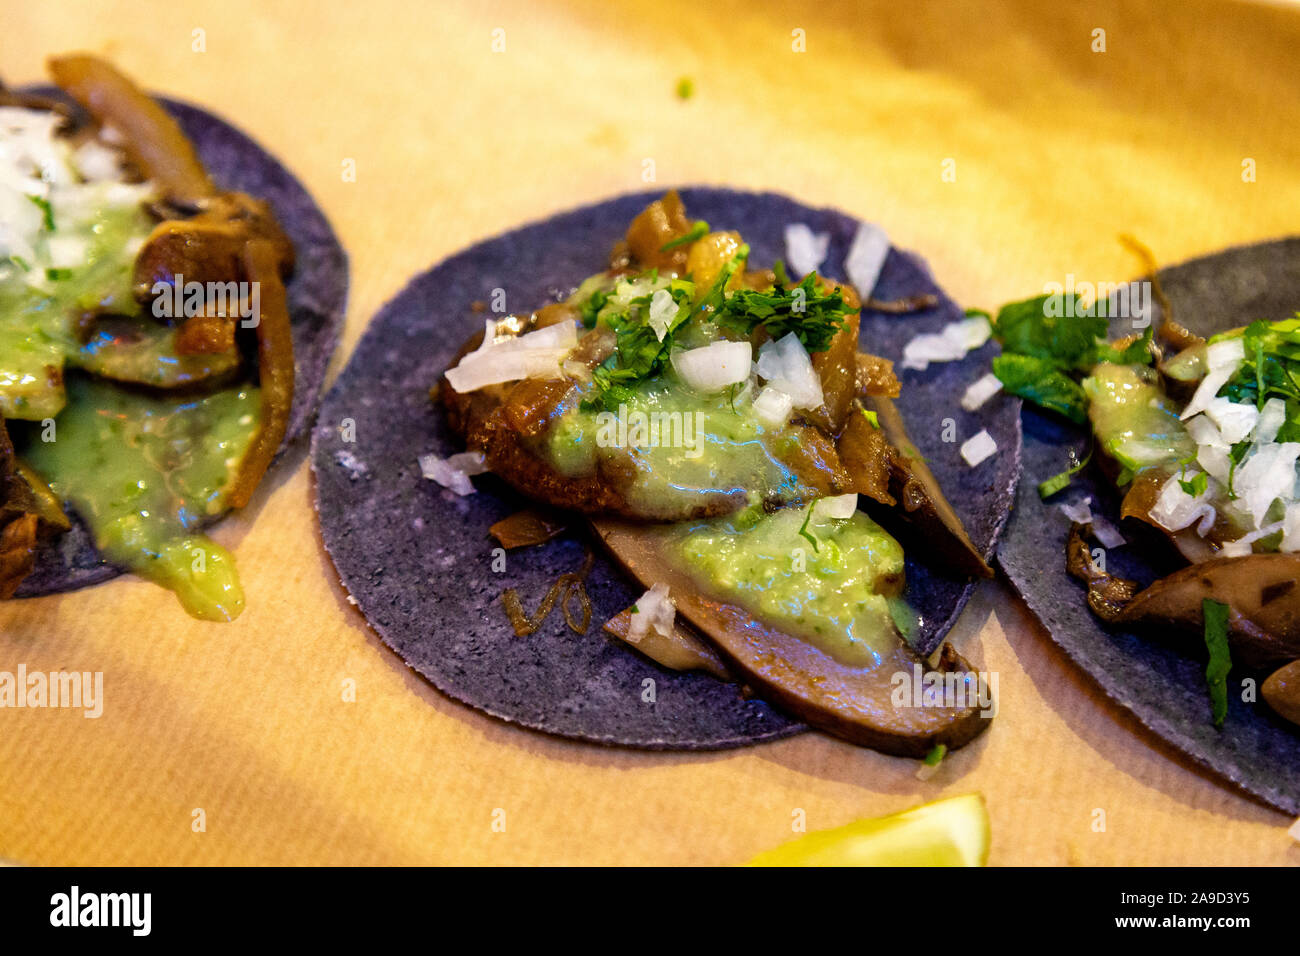 15th November 2019 - Opening of Market Hall West End, London, UK, mushroom tacos on black tortillas from the Super Tacos stall Stock Photo